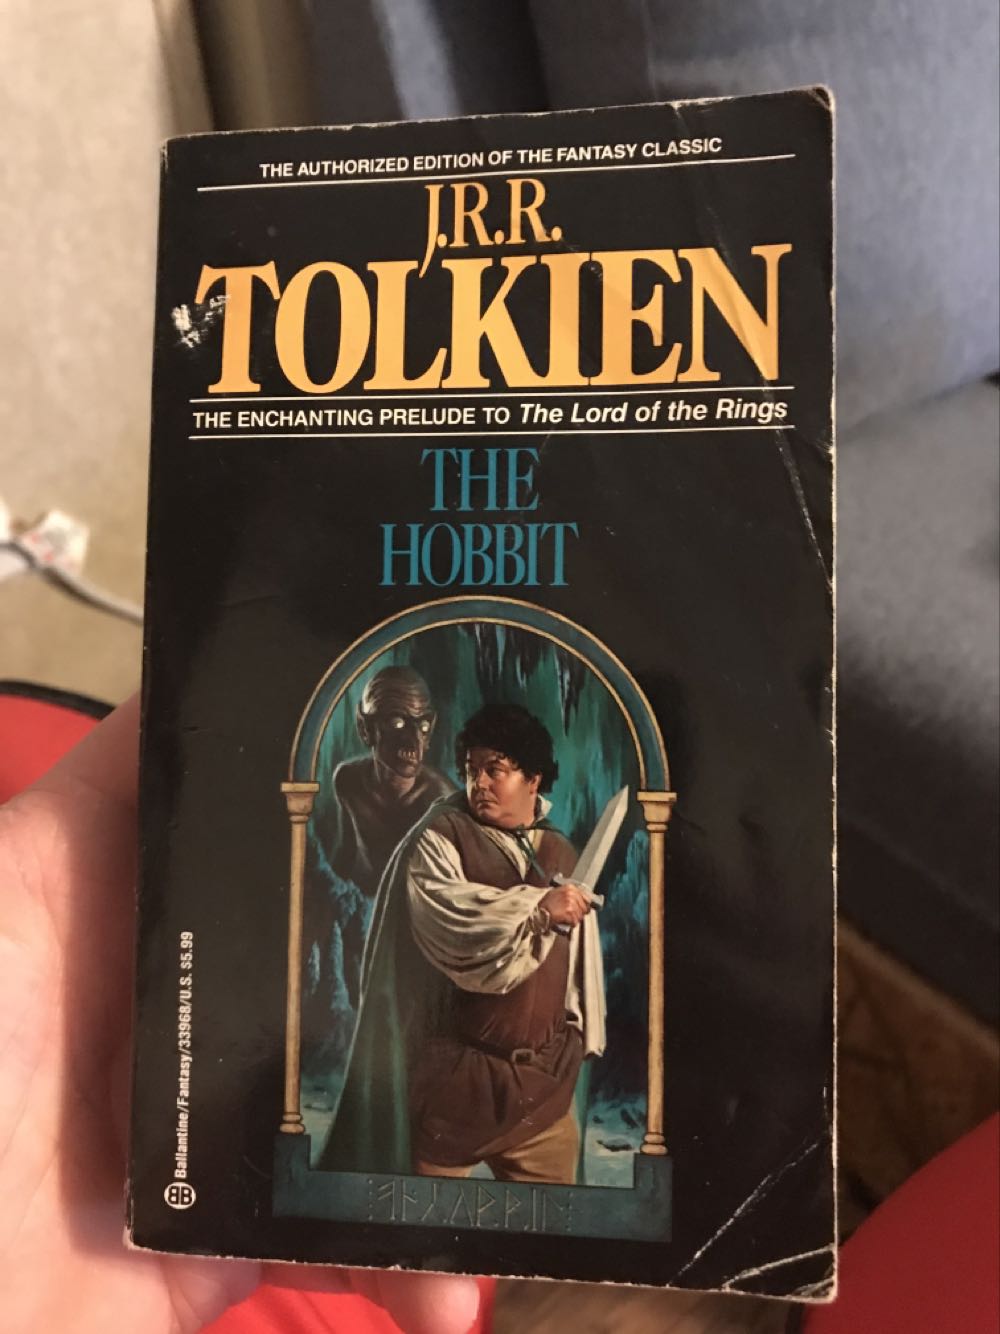 The Hobbit - J.R.R. Tolkien (The Ballantine Publishing Group - Paperback) book collectible [Barcode 9780345339683] - Main Image 3